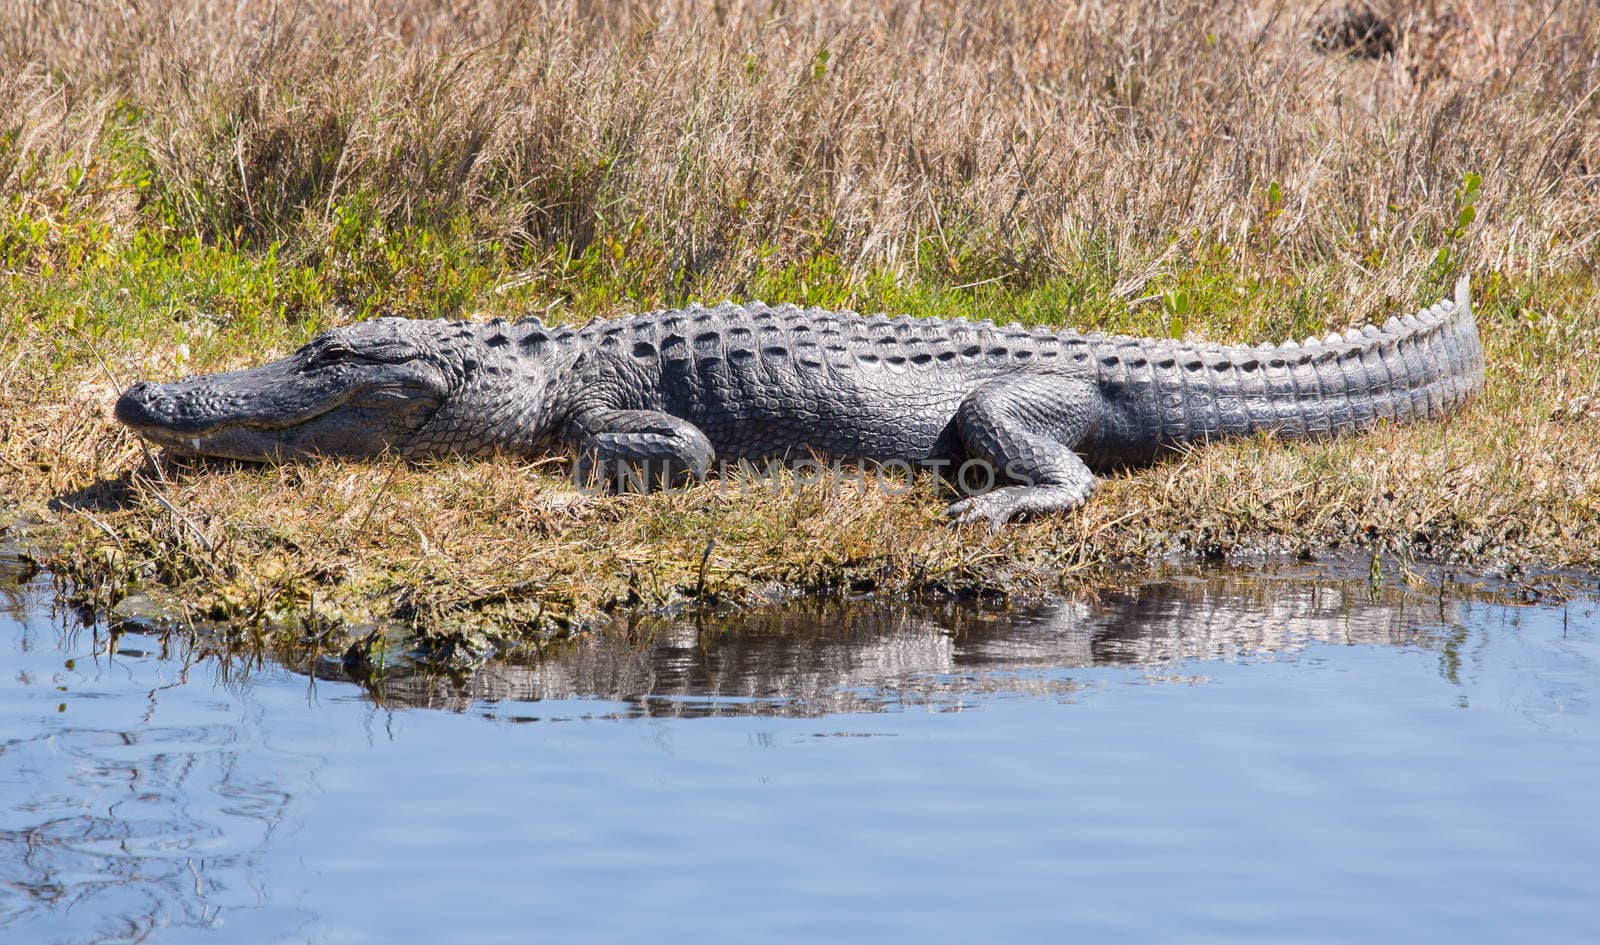 According to Wikipedia there are only two living species of alligator; the American alligator and the Chinese alligator. The gator is a Florida icon. They are found all over the state. This one resides at the Merritt Island National Wildlife Reserve.